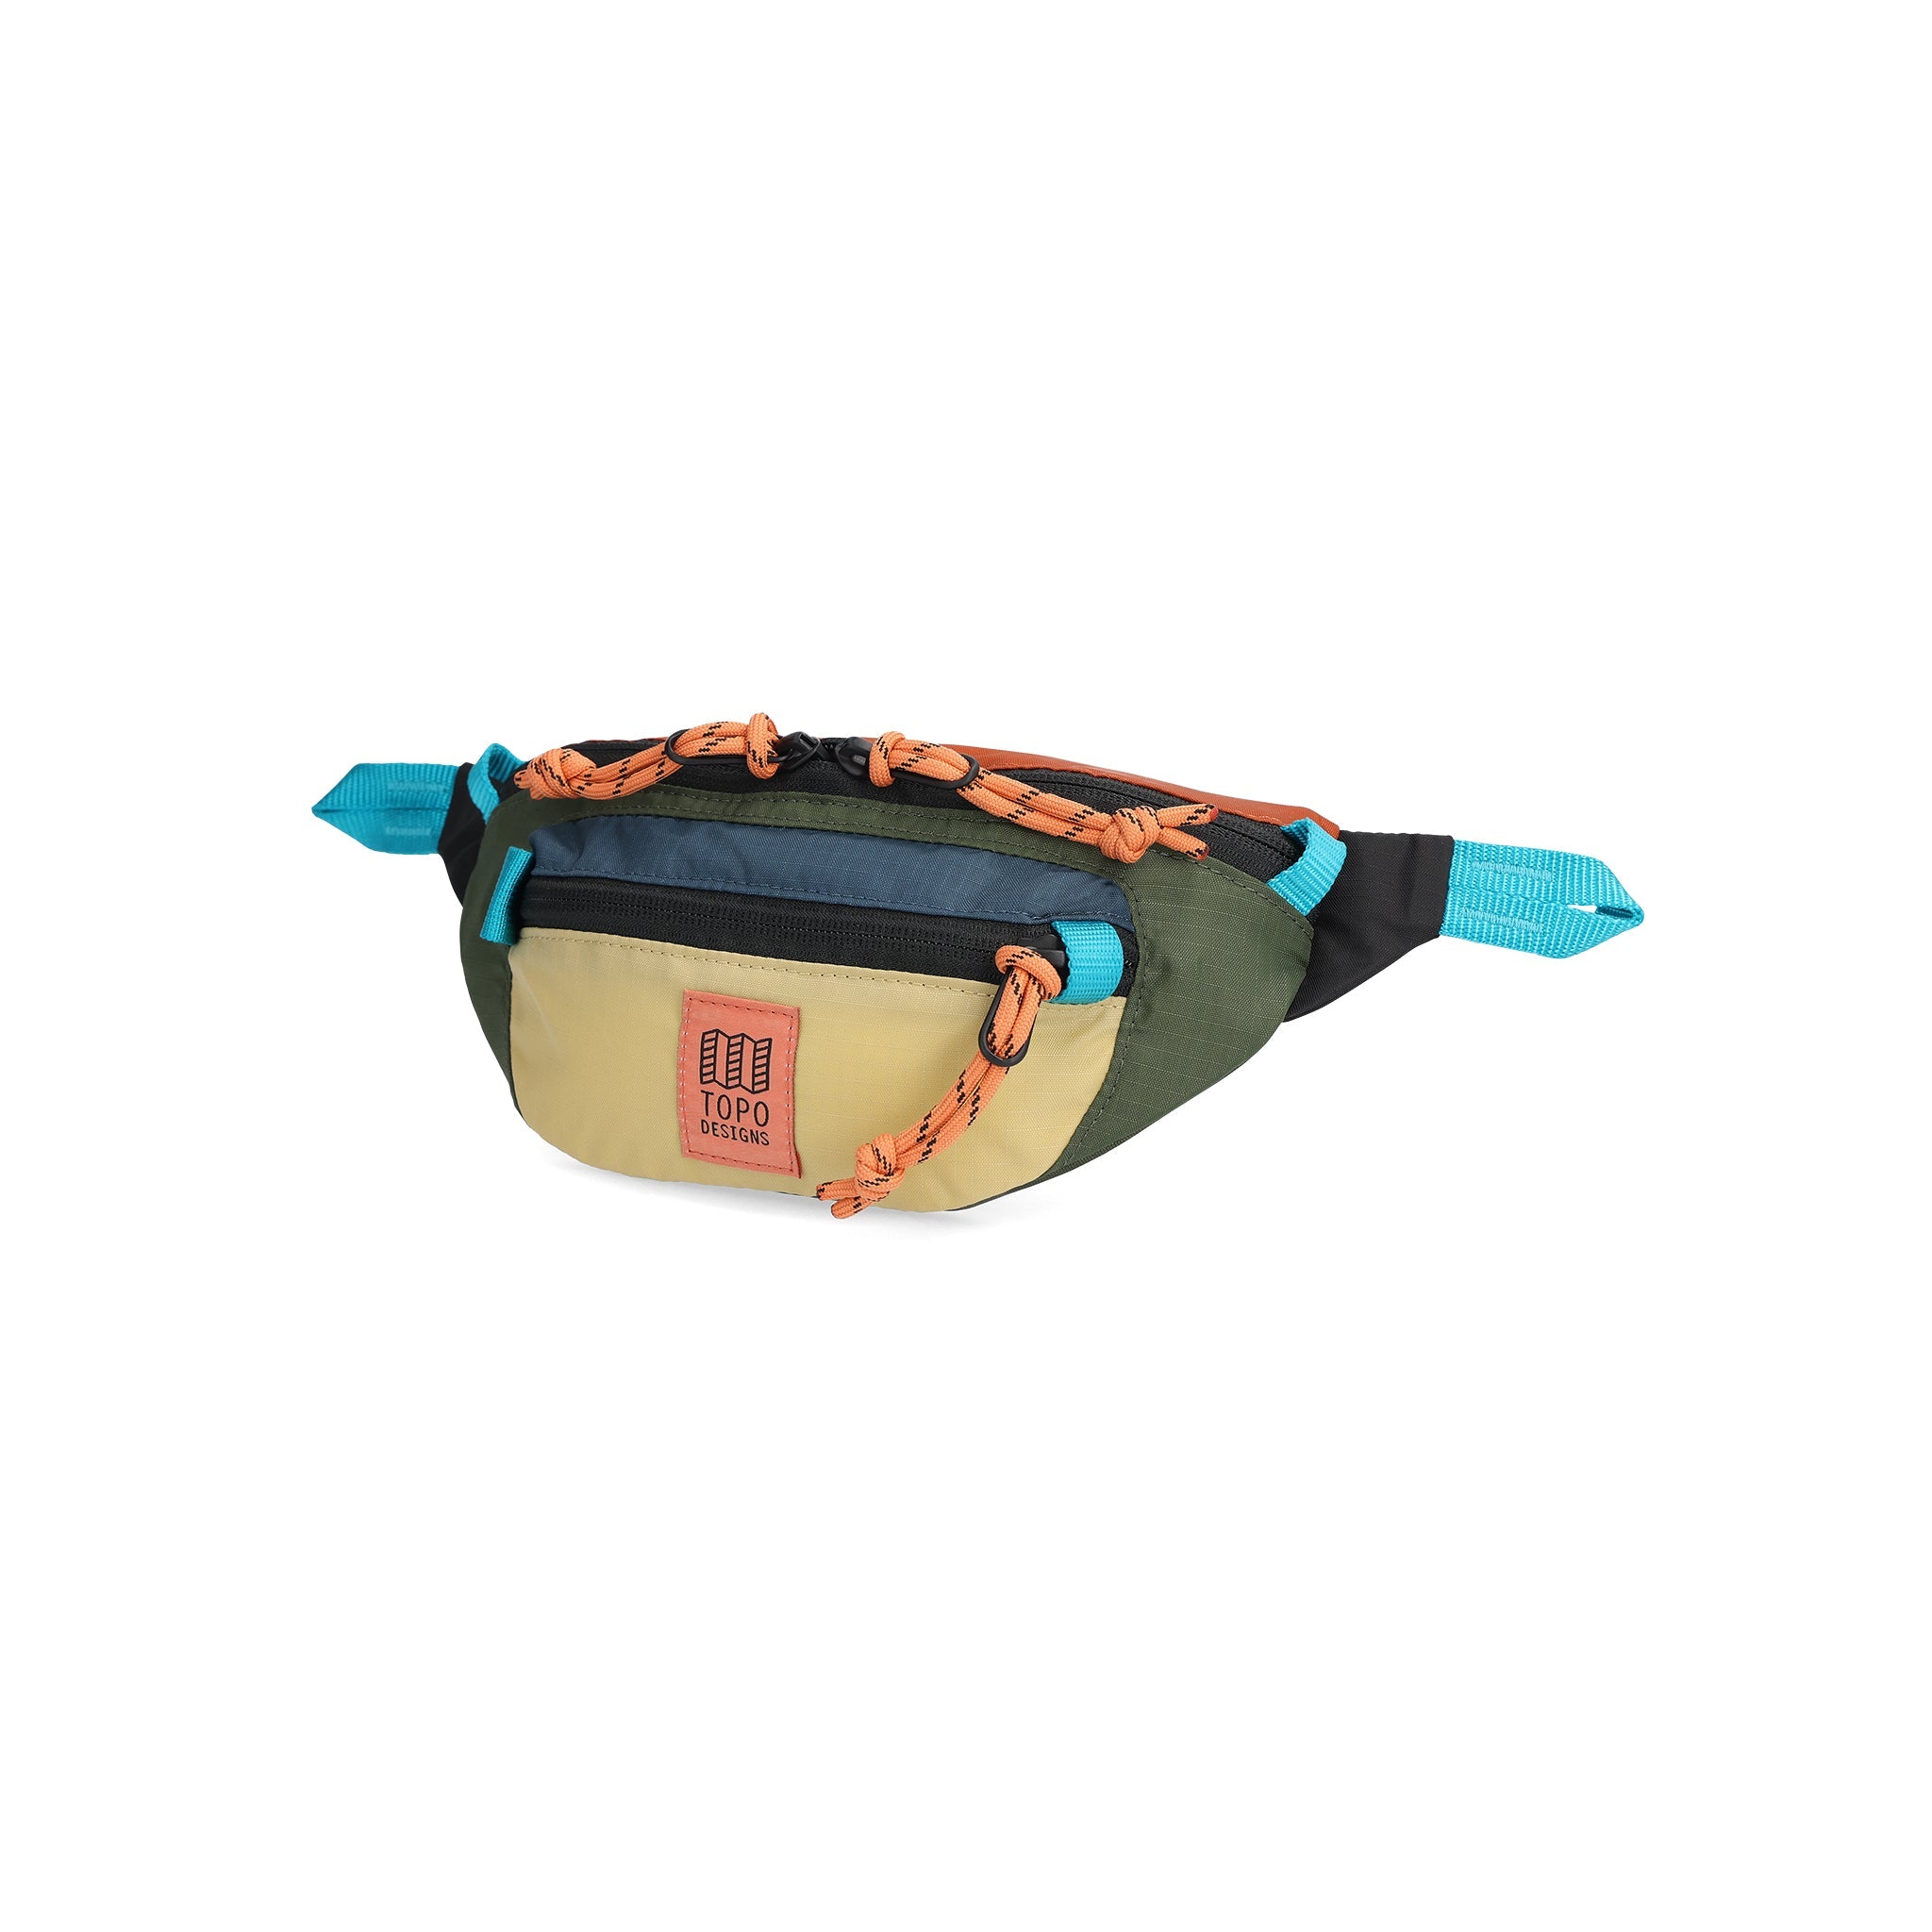 Front View of Topo Designs Mountain Waist Pack in "Olive / Hemp"